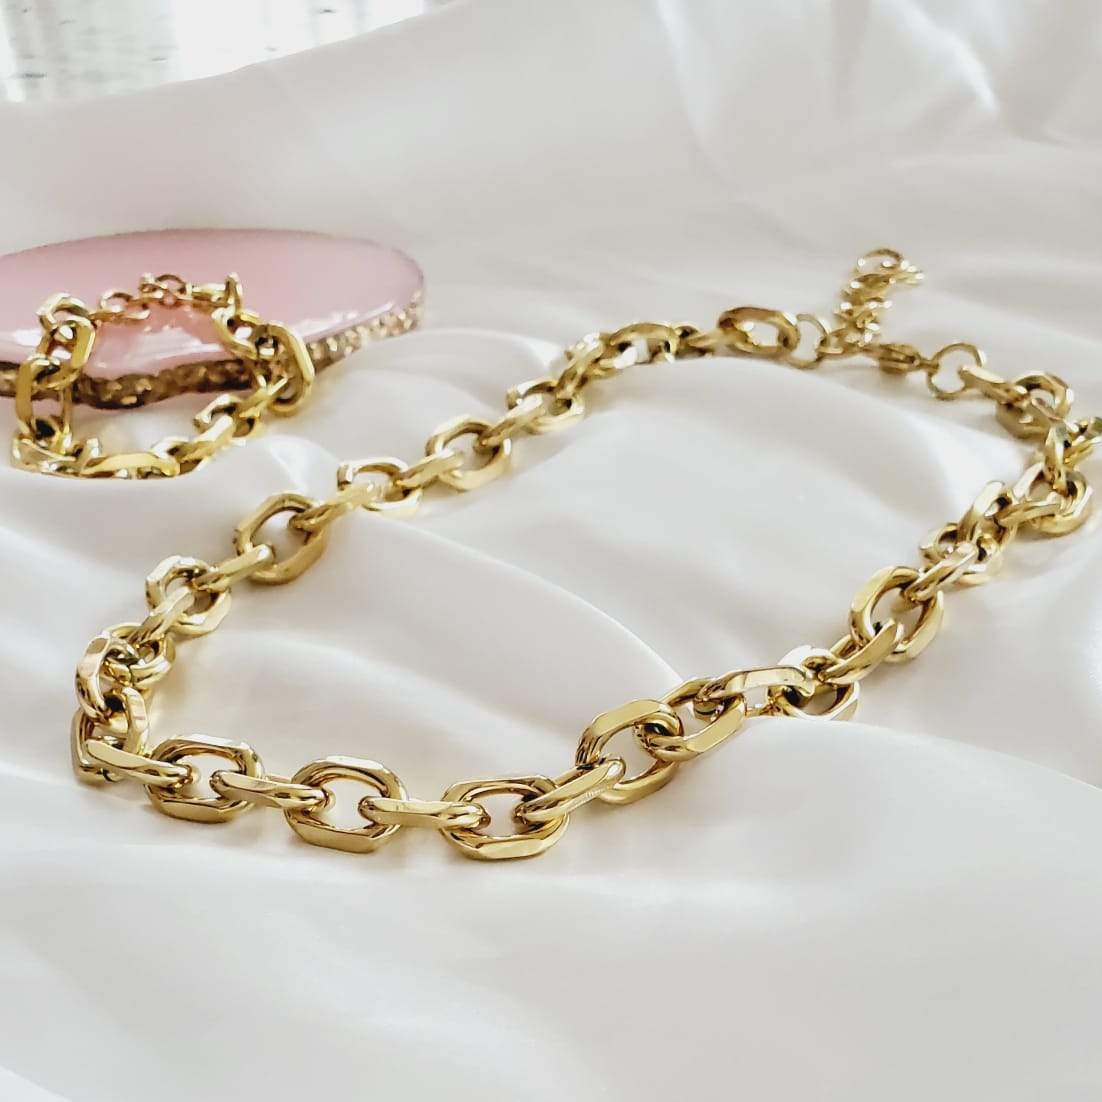 Minimalist chain, Gold filled Chain, Flat Gold Necklace, Snake Chain, Water resistant jewelry, water resistant Necklace, Water resistant bracelet, vintage jewelry, vintage jewelry, vintage necklace, 14k gold necklace, 14k gold jewelry, 14k gold necklace, fine jewelry, fine necklace, fine bracelet, snake gold necklace, bold necklace, bold jewelry, handmade jewelry,